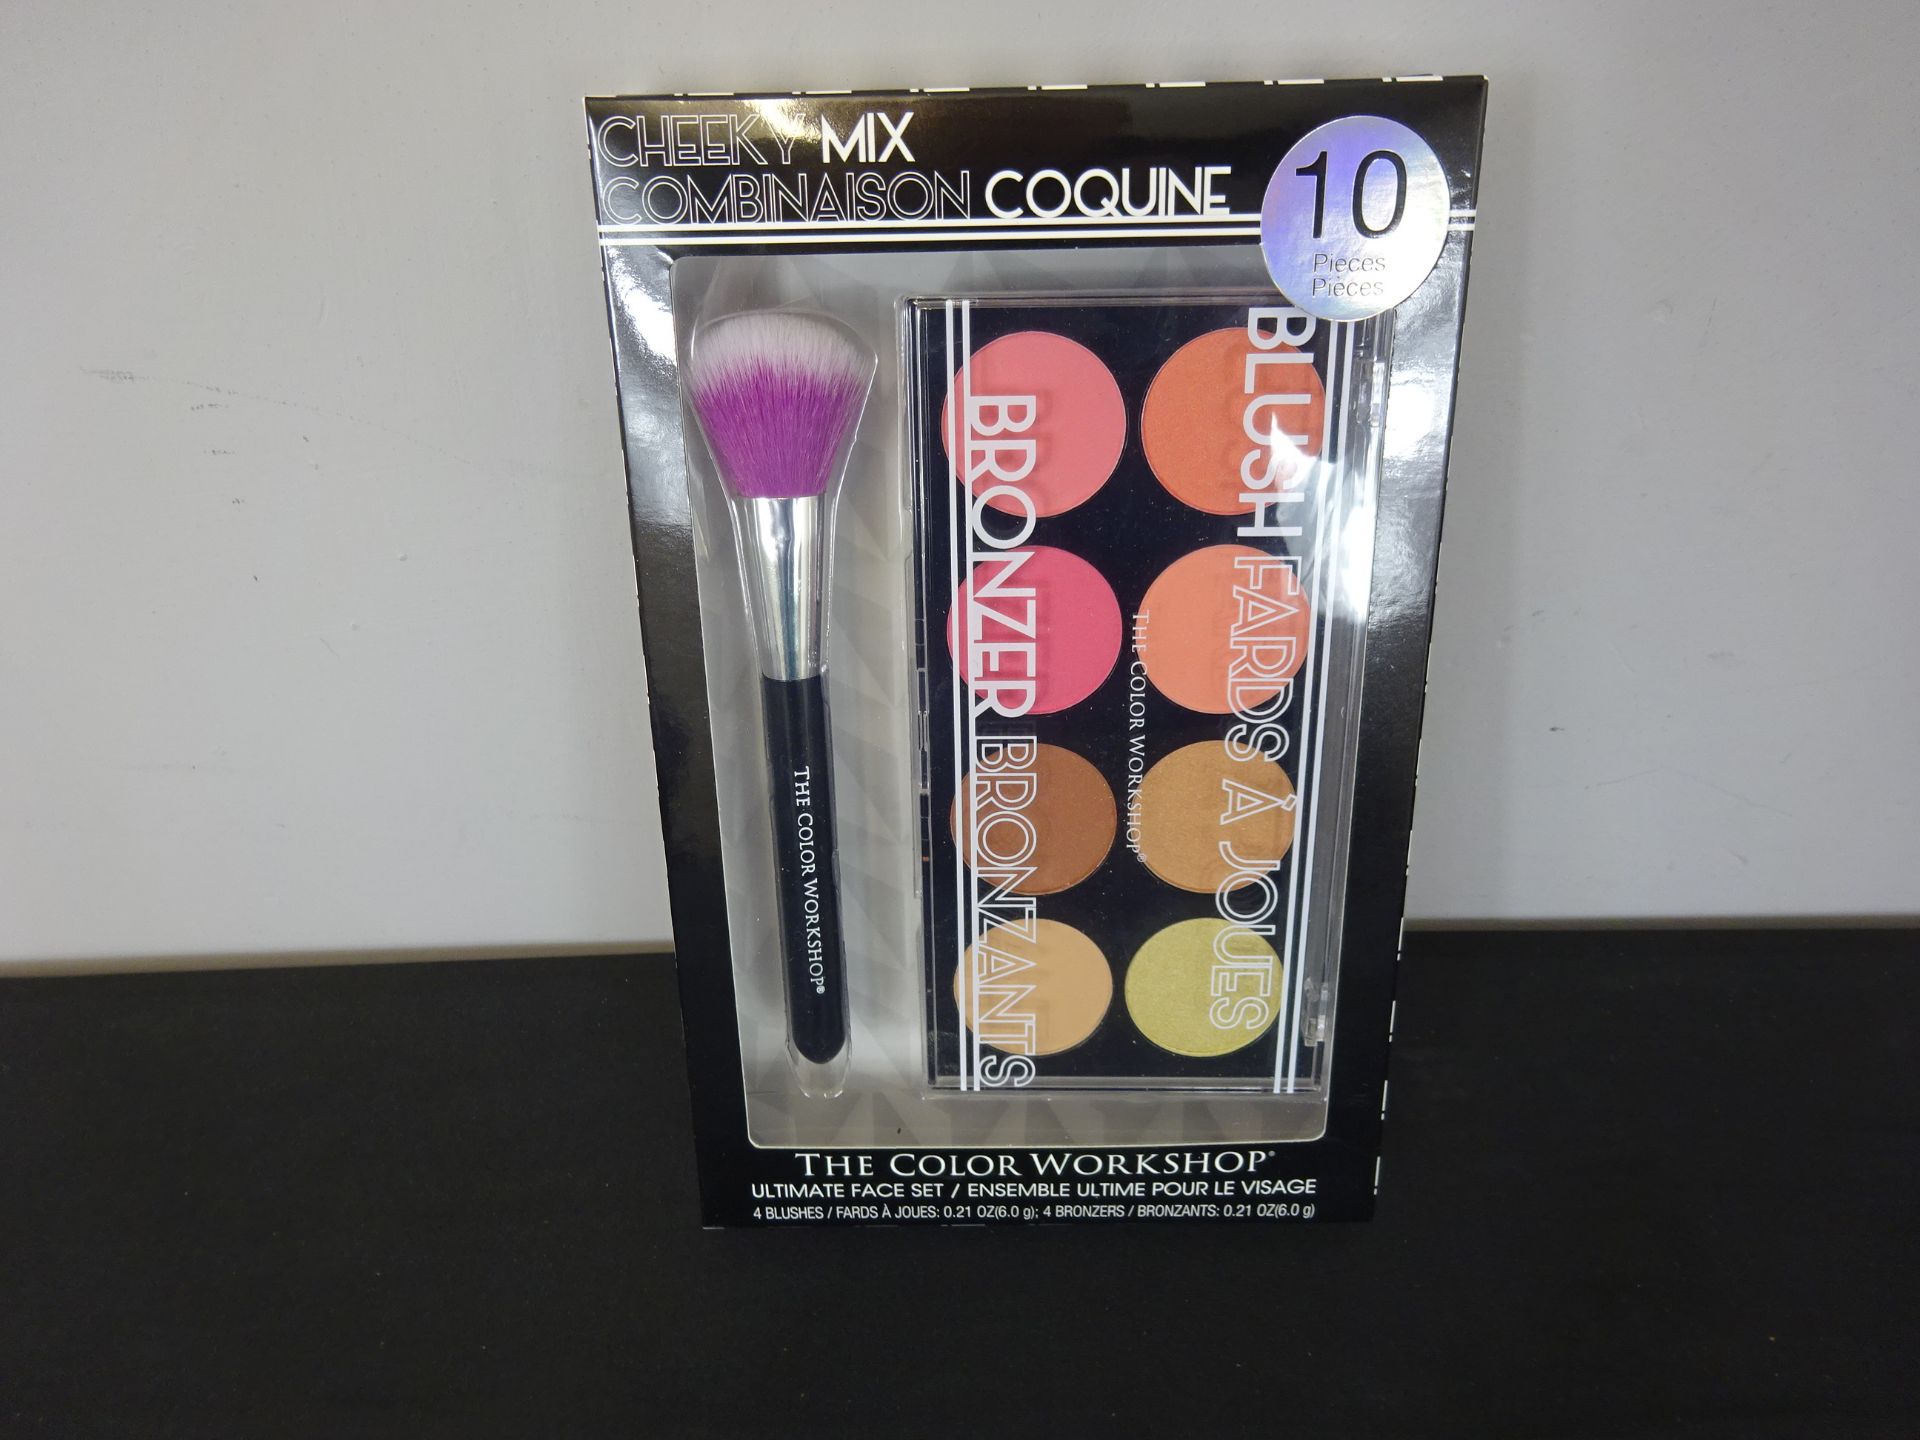 New 10pc The Colour Workshop Ultimate Face Set - Brush, 4 Blushes & 4 Bronzers